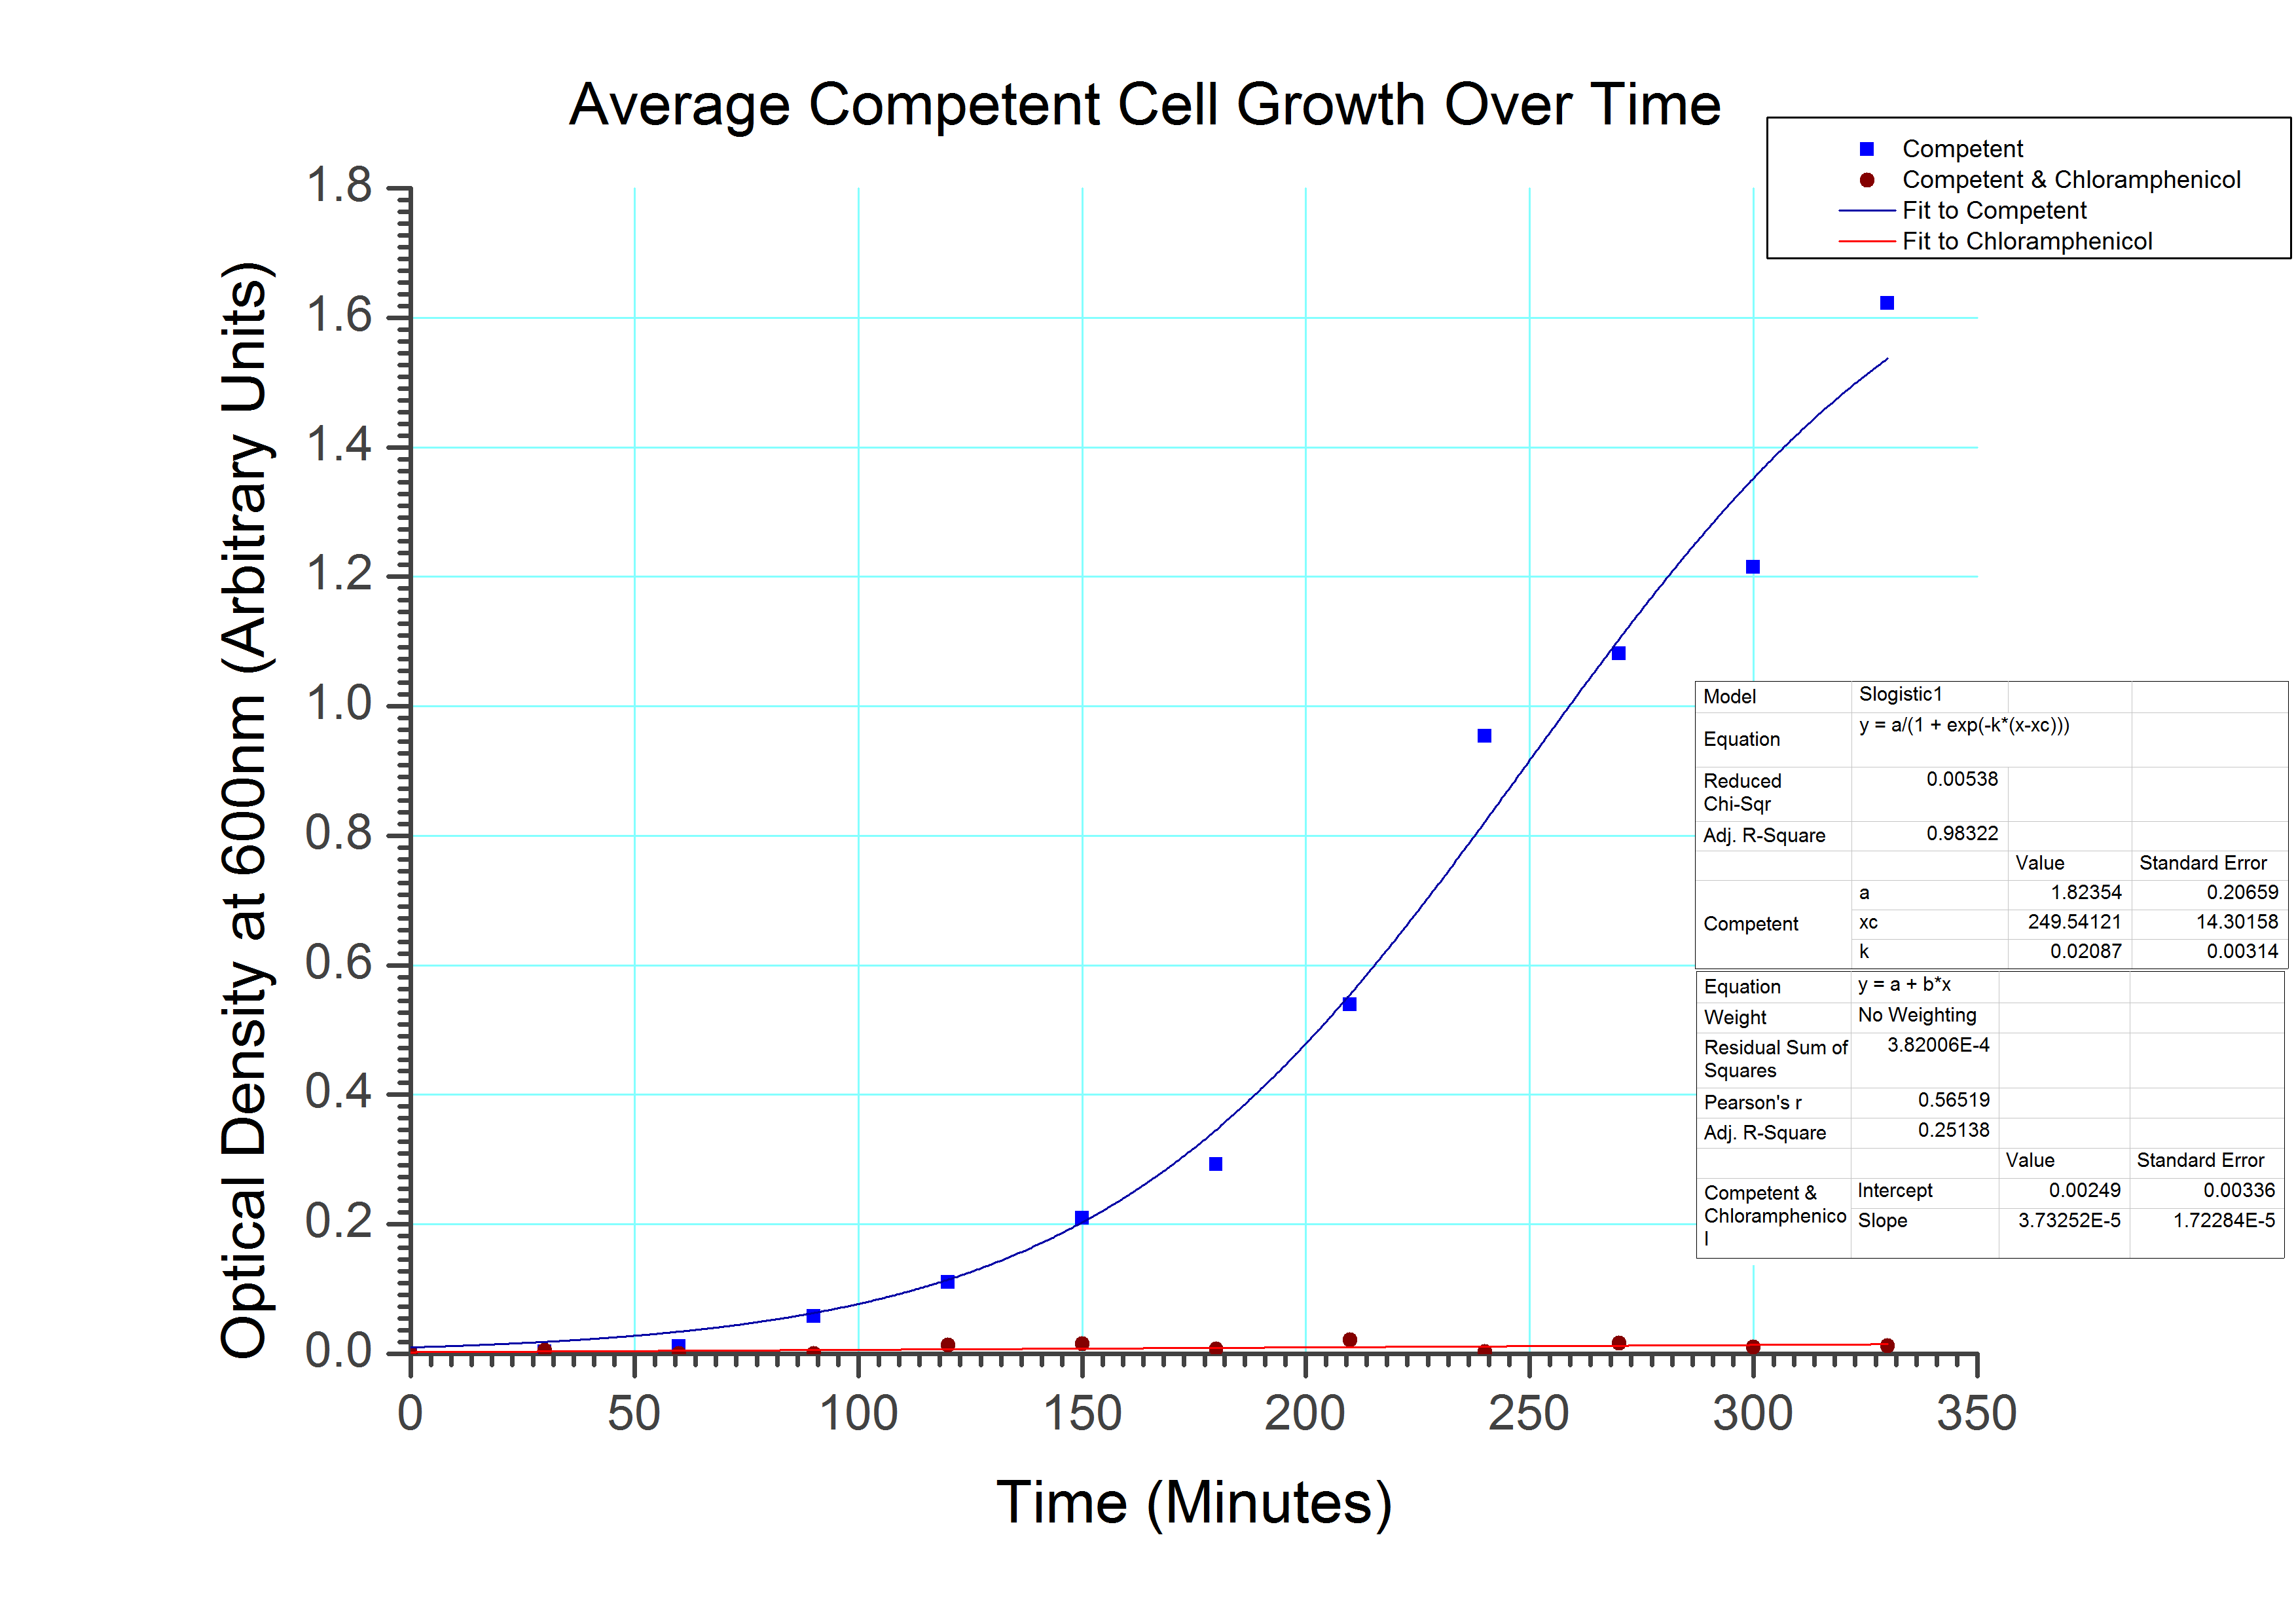 Control growth-curve for Competent Cells